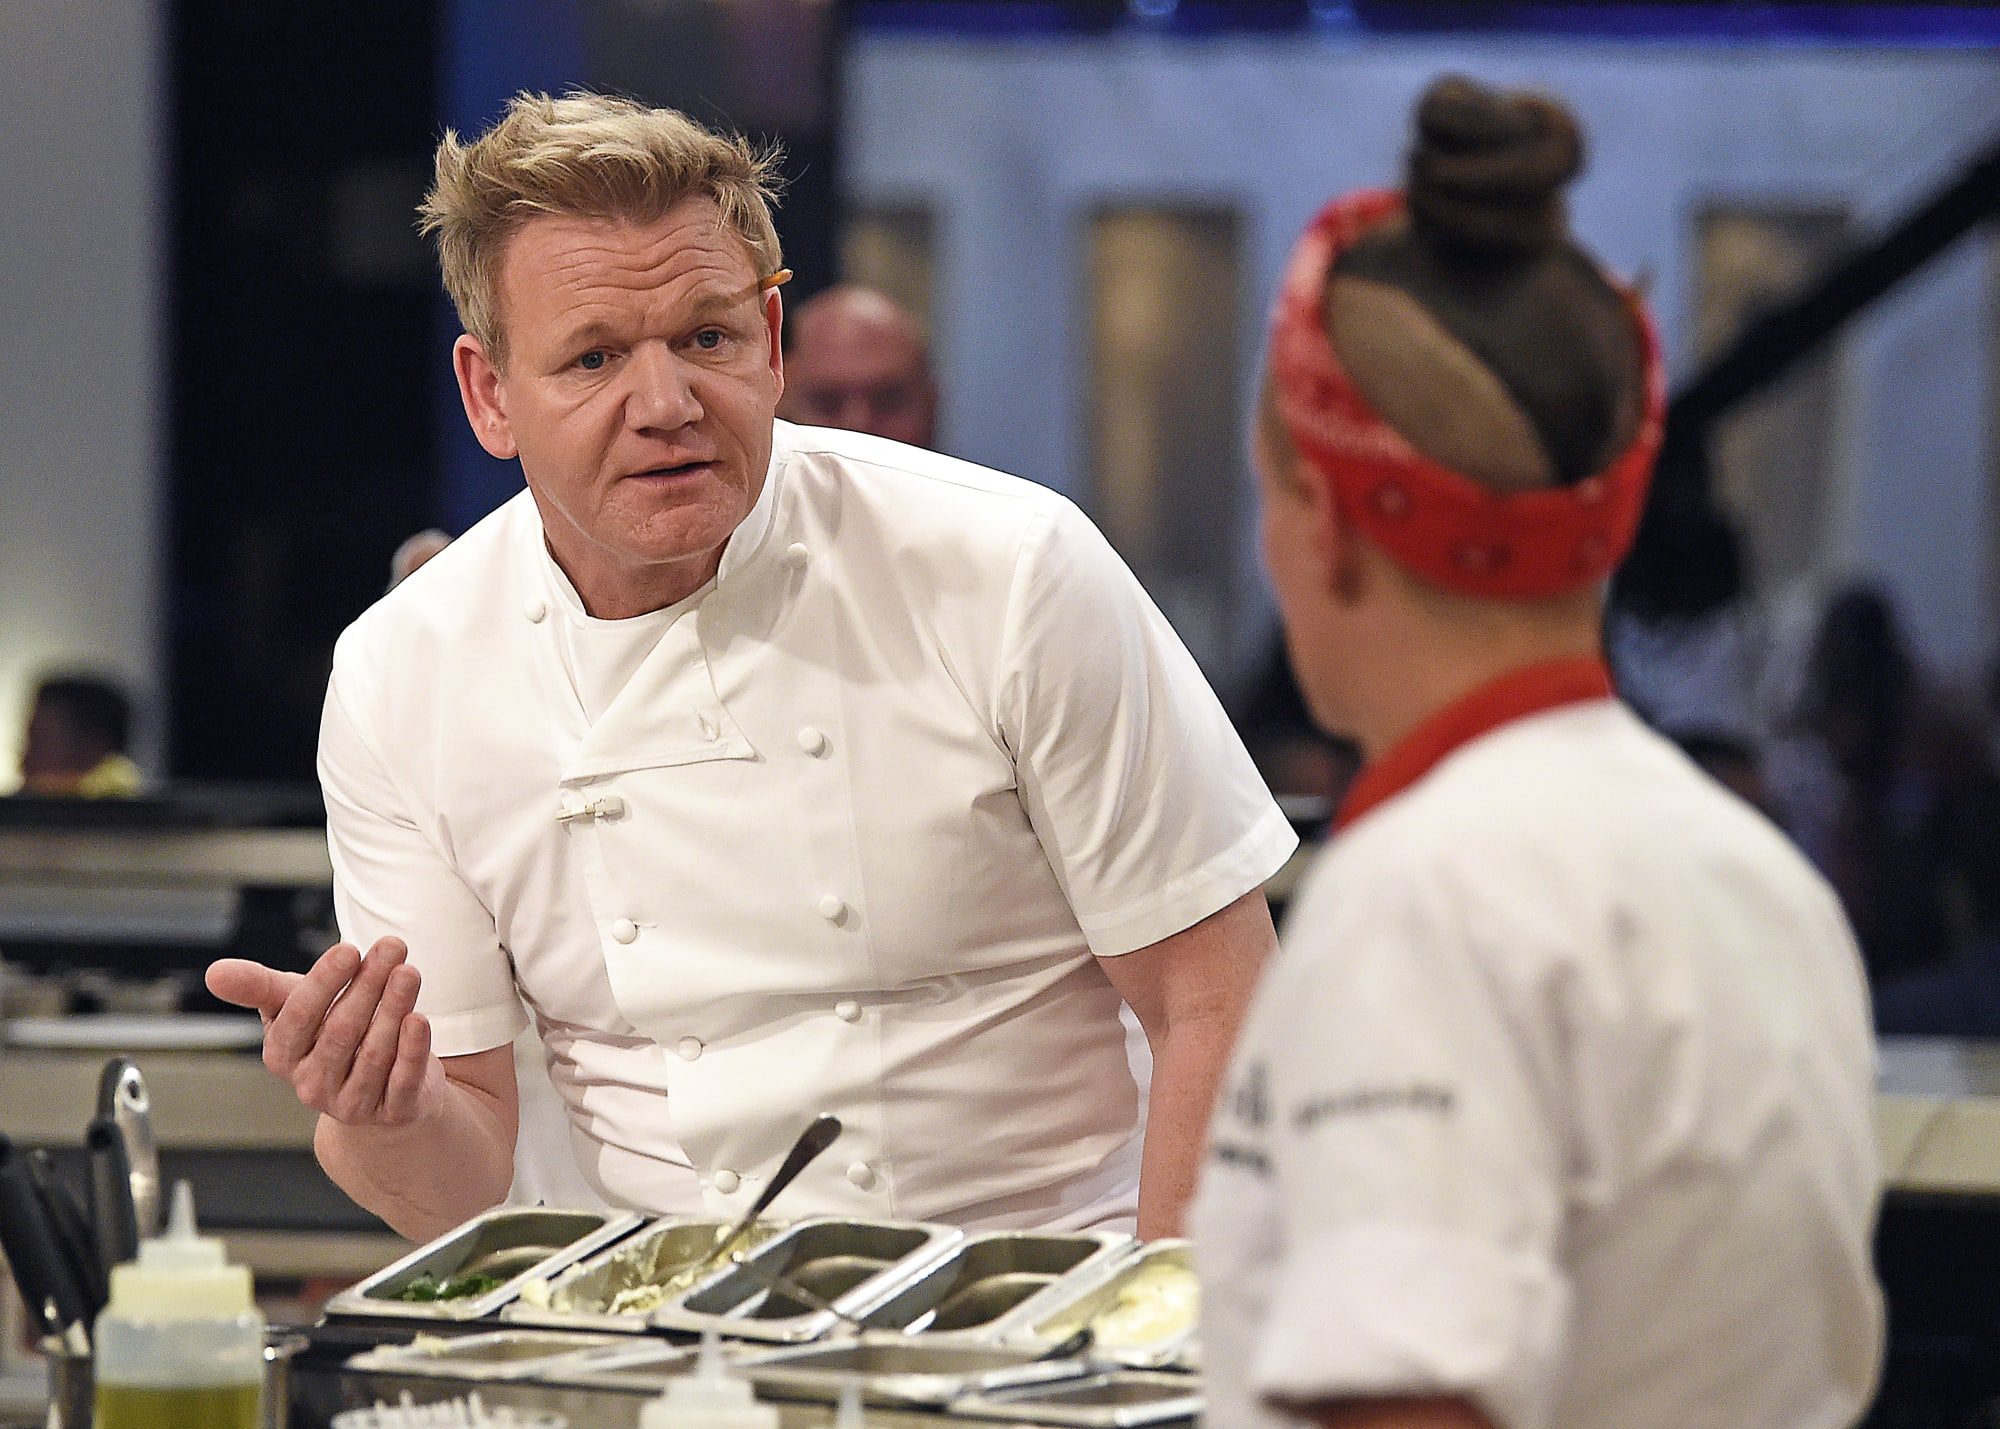 Hell's Kitchen season 20 episodes 17 and 18